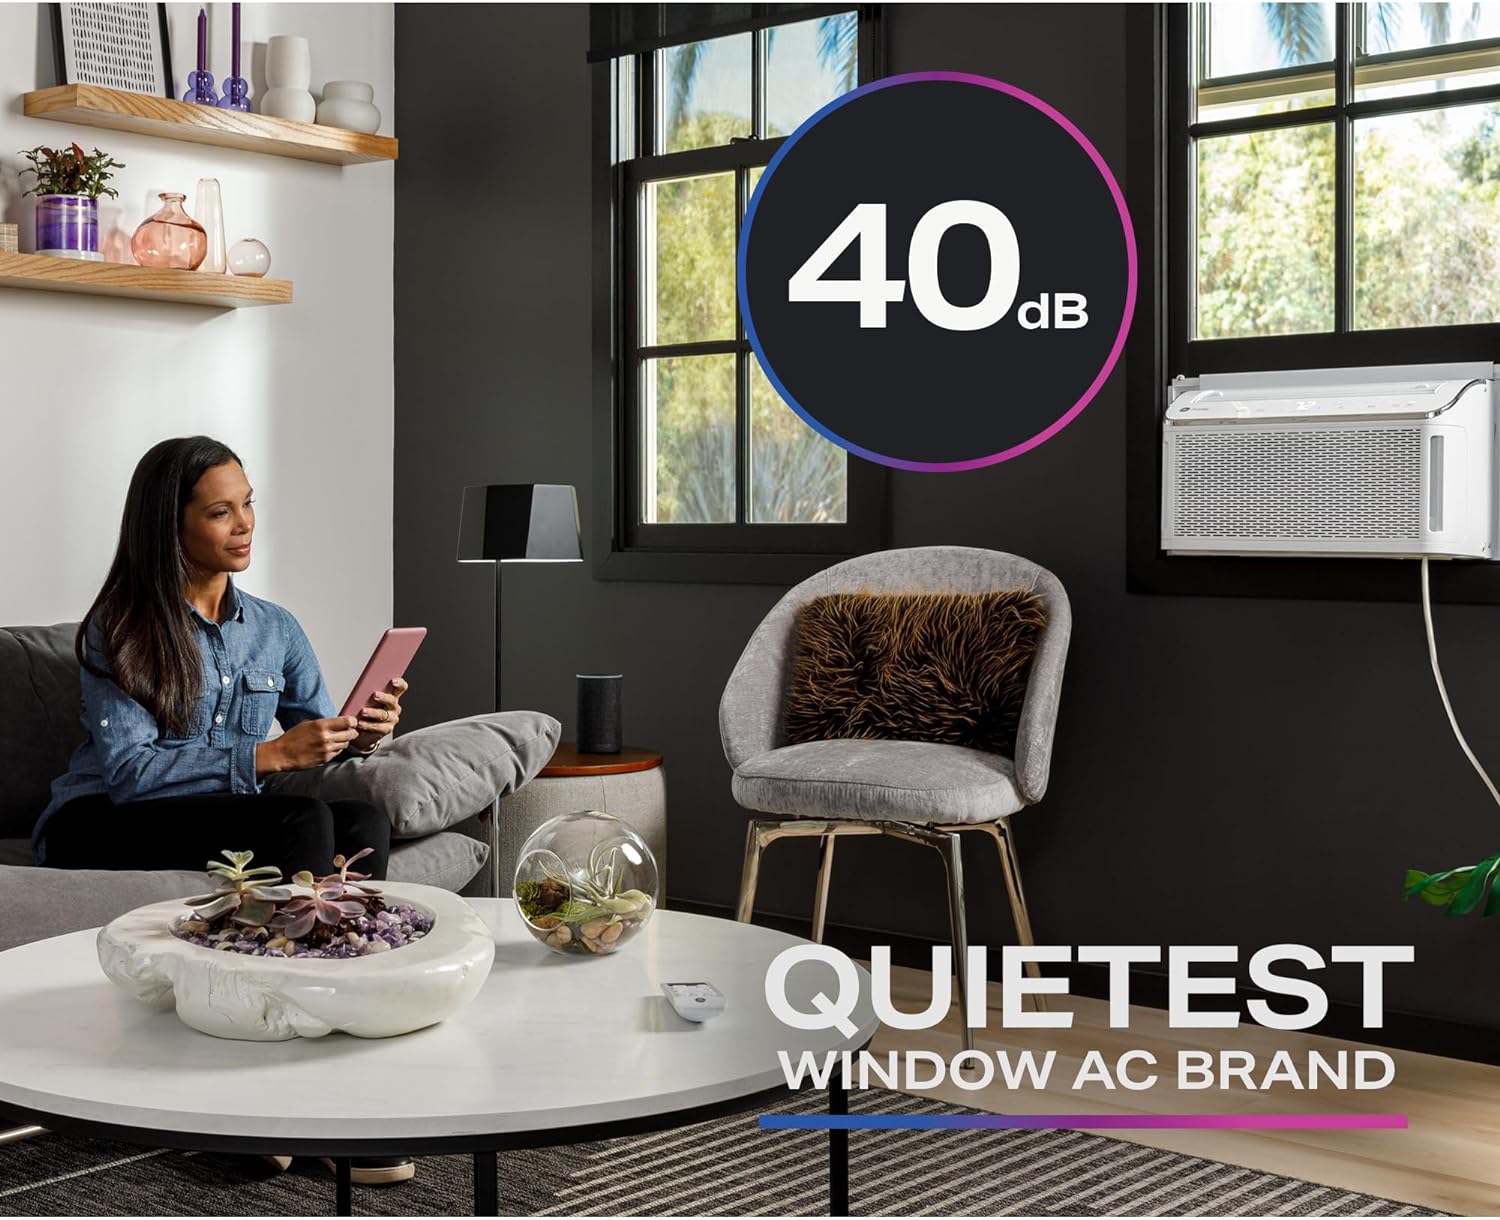 GE Profile Ultra Quiet Window Air Conditioner 6,200 BTU, WiFi Enabled, Ideal for Small Rooms, Easy Installation with Included Kit, 6K Window AC Unit, White (Refurbished)